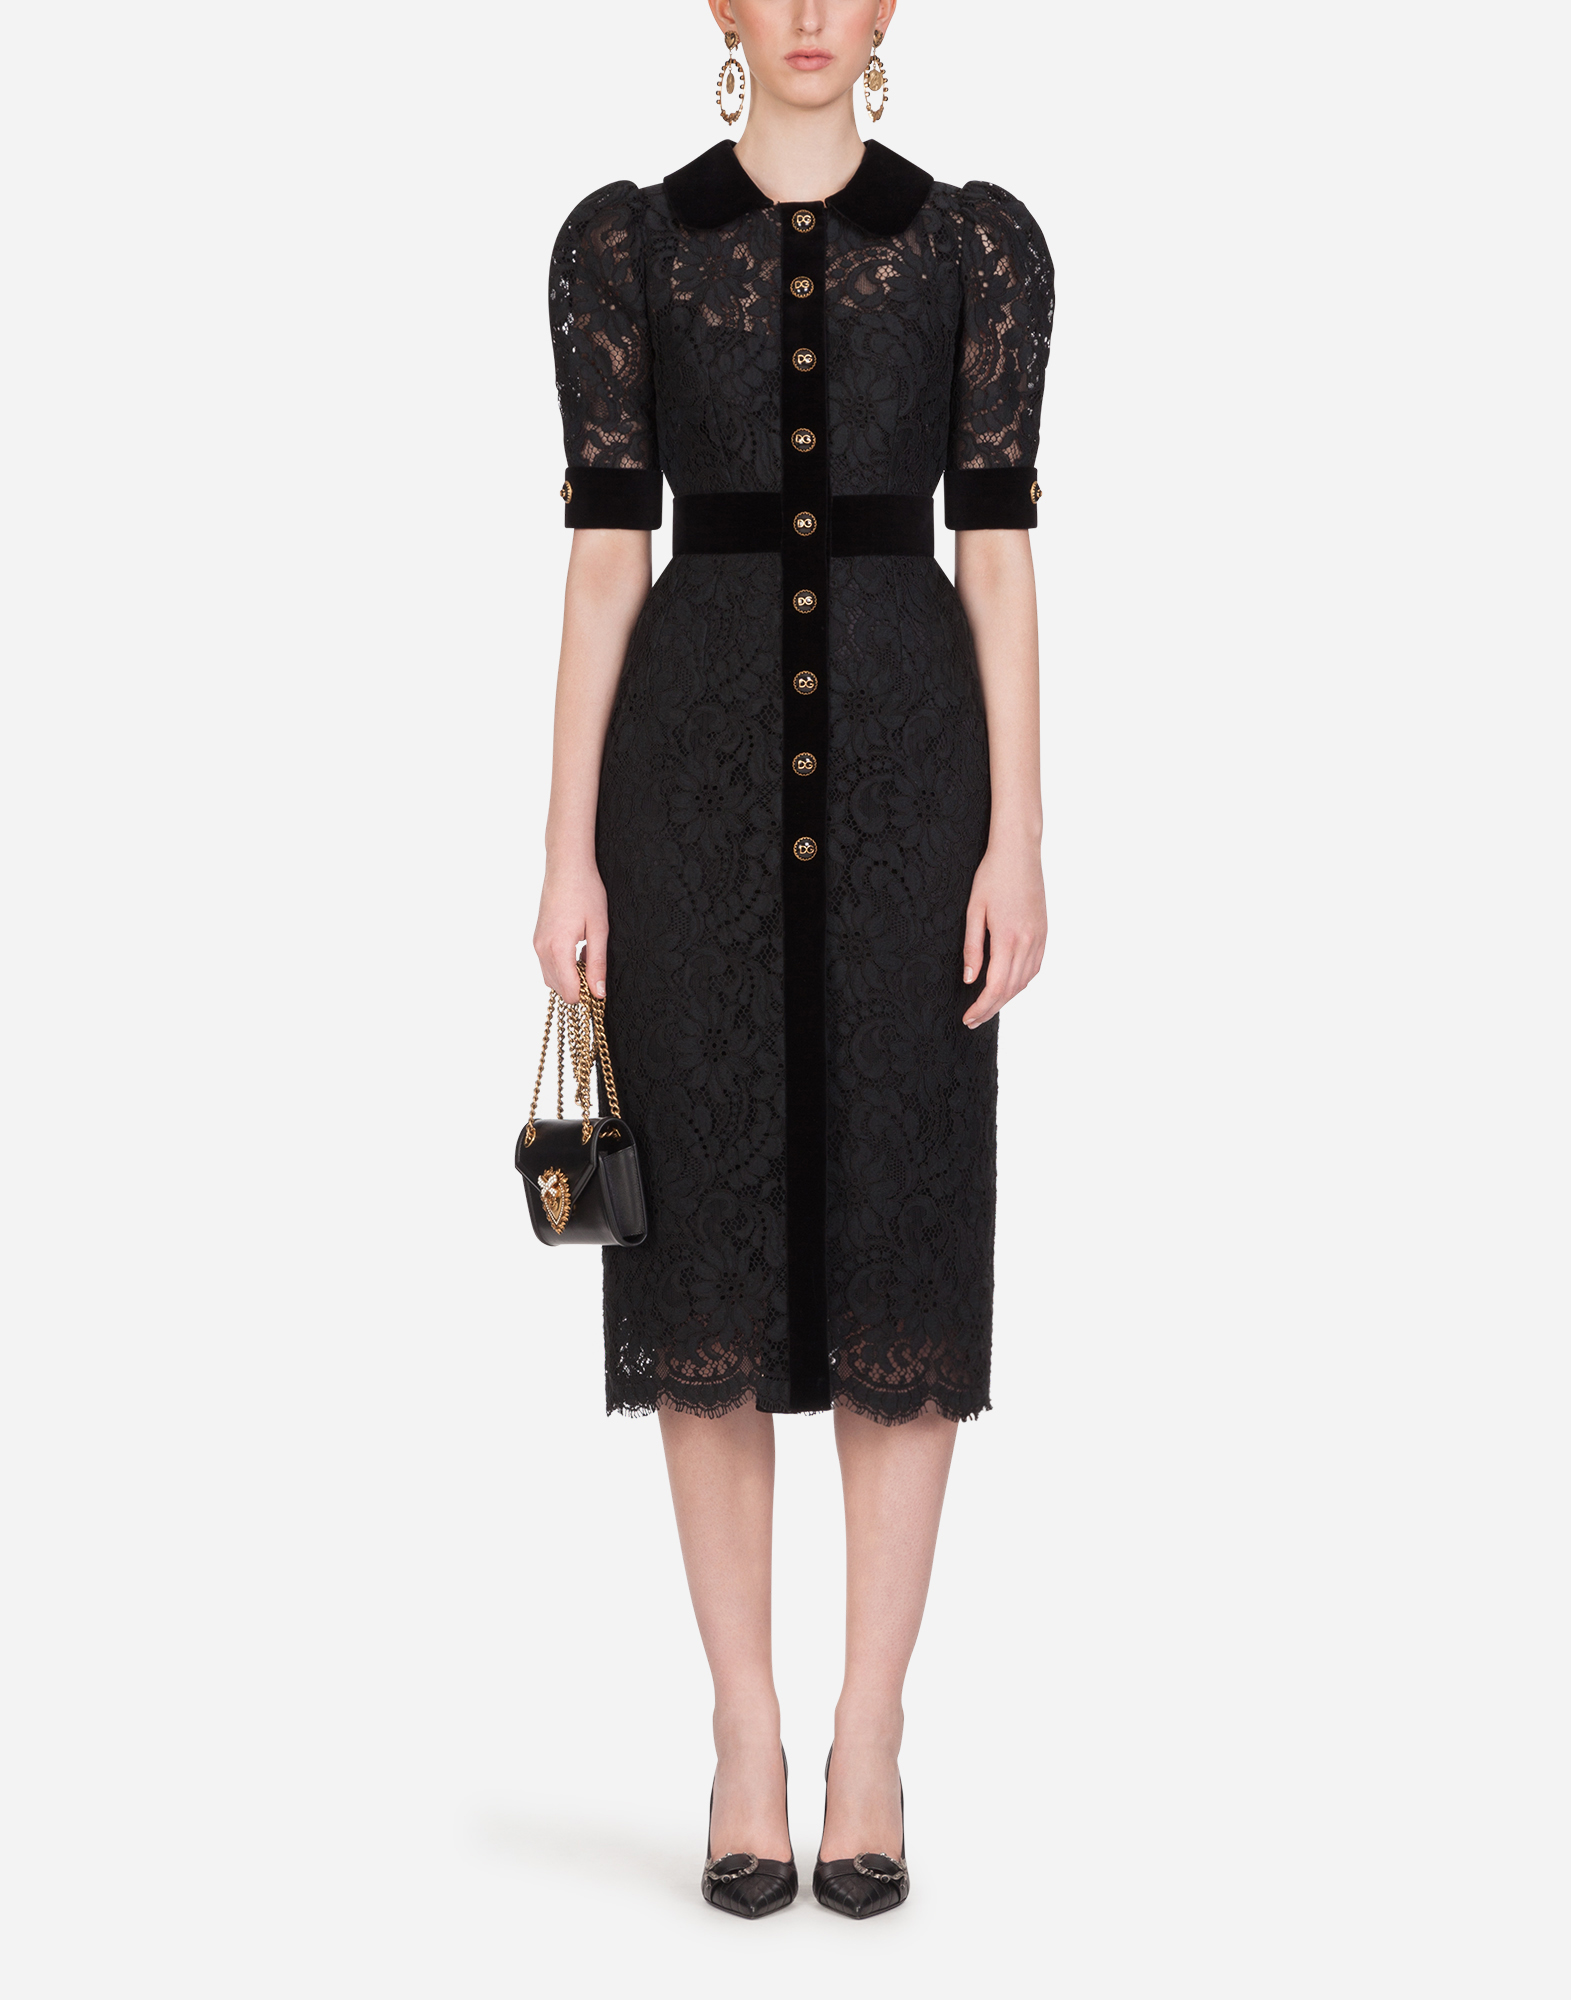 Lace midi dress with bejeweled buttons